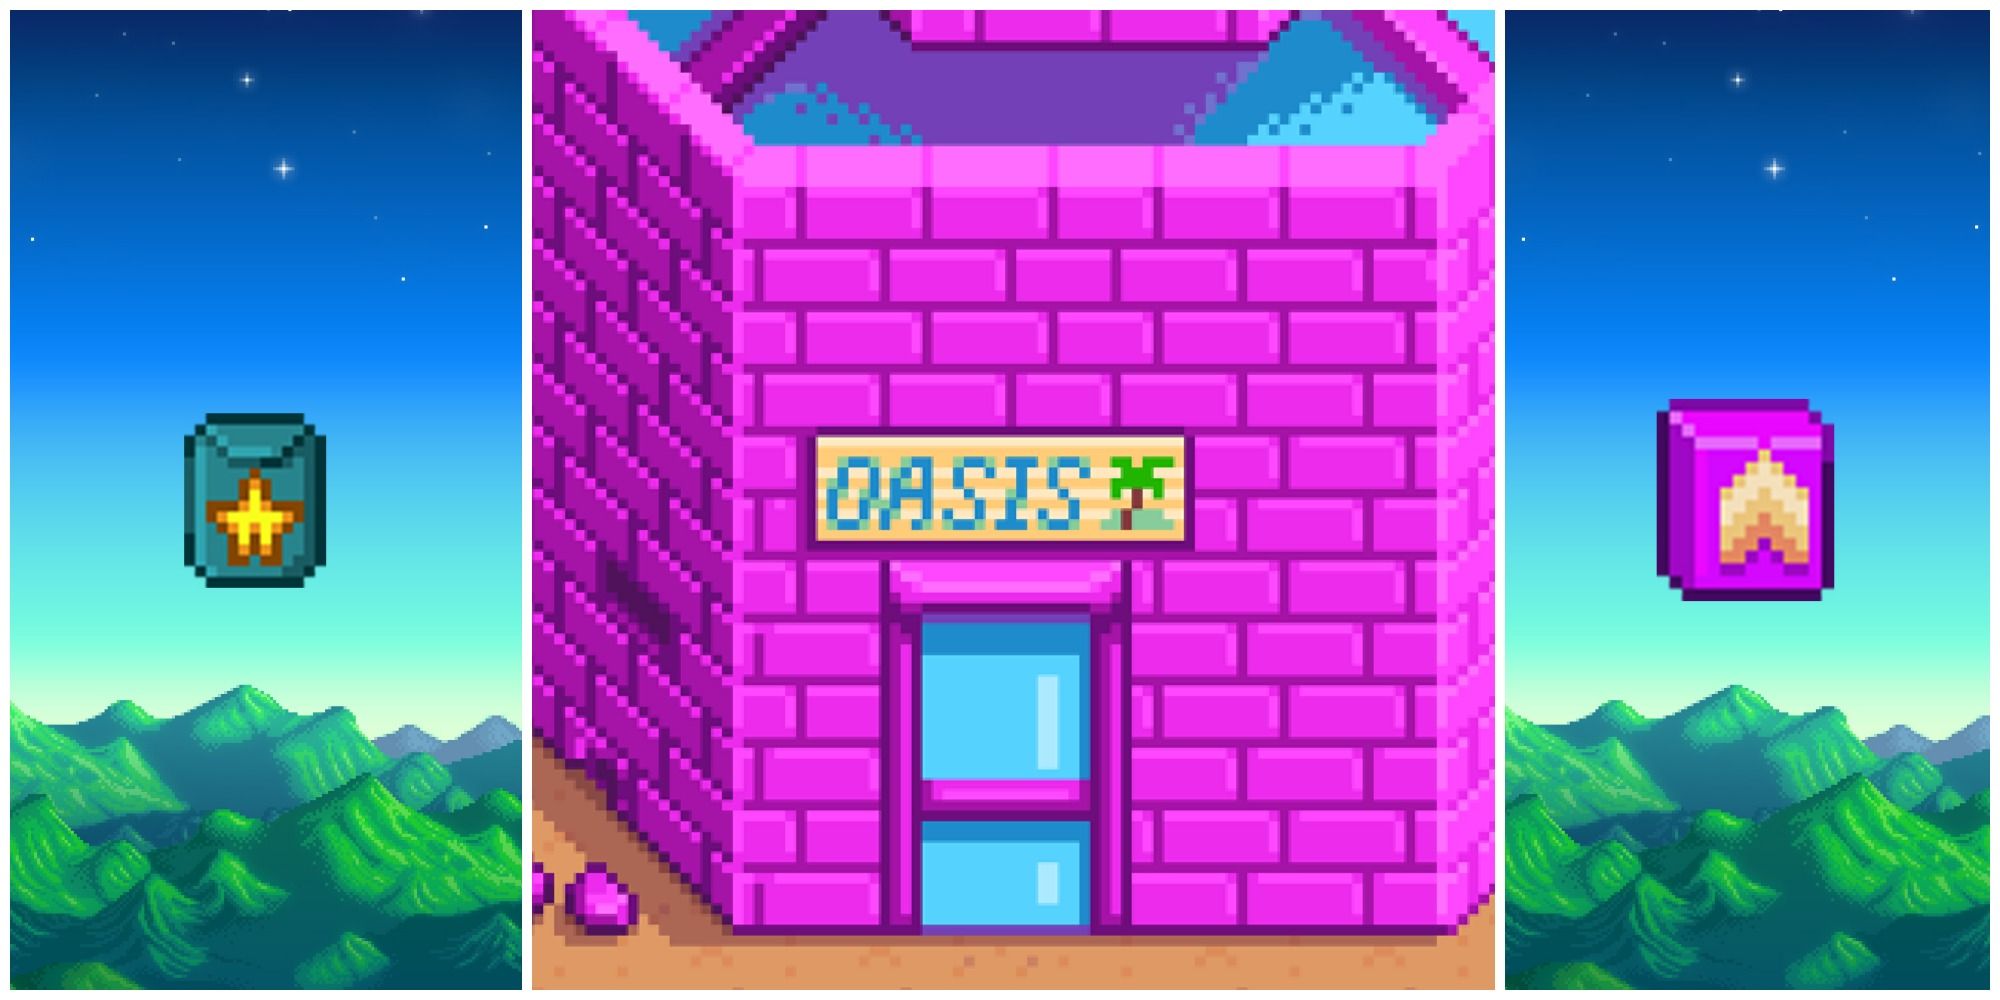 Split image of Starfruit Seeds, the Oasis store building, and Deluxe Speed-Gro from left to right